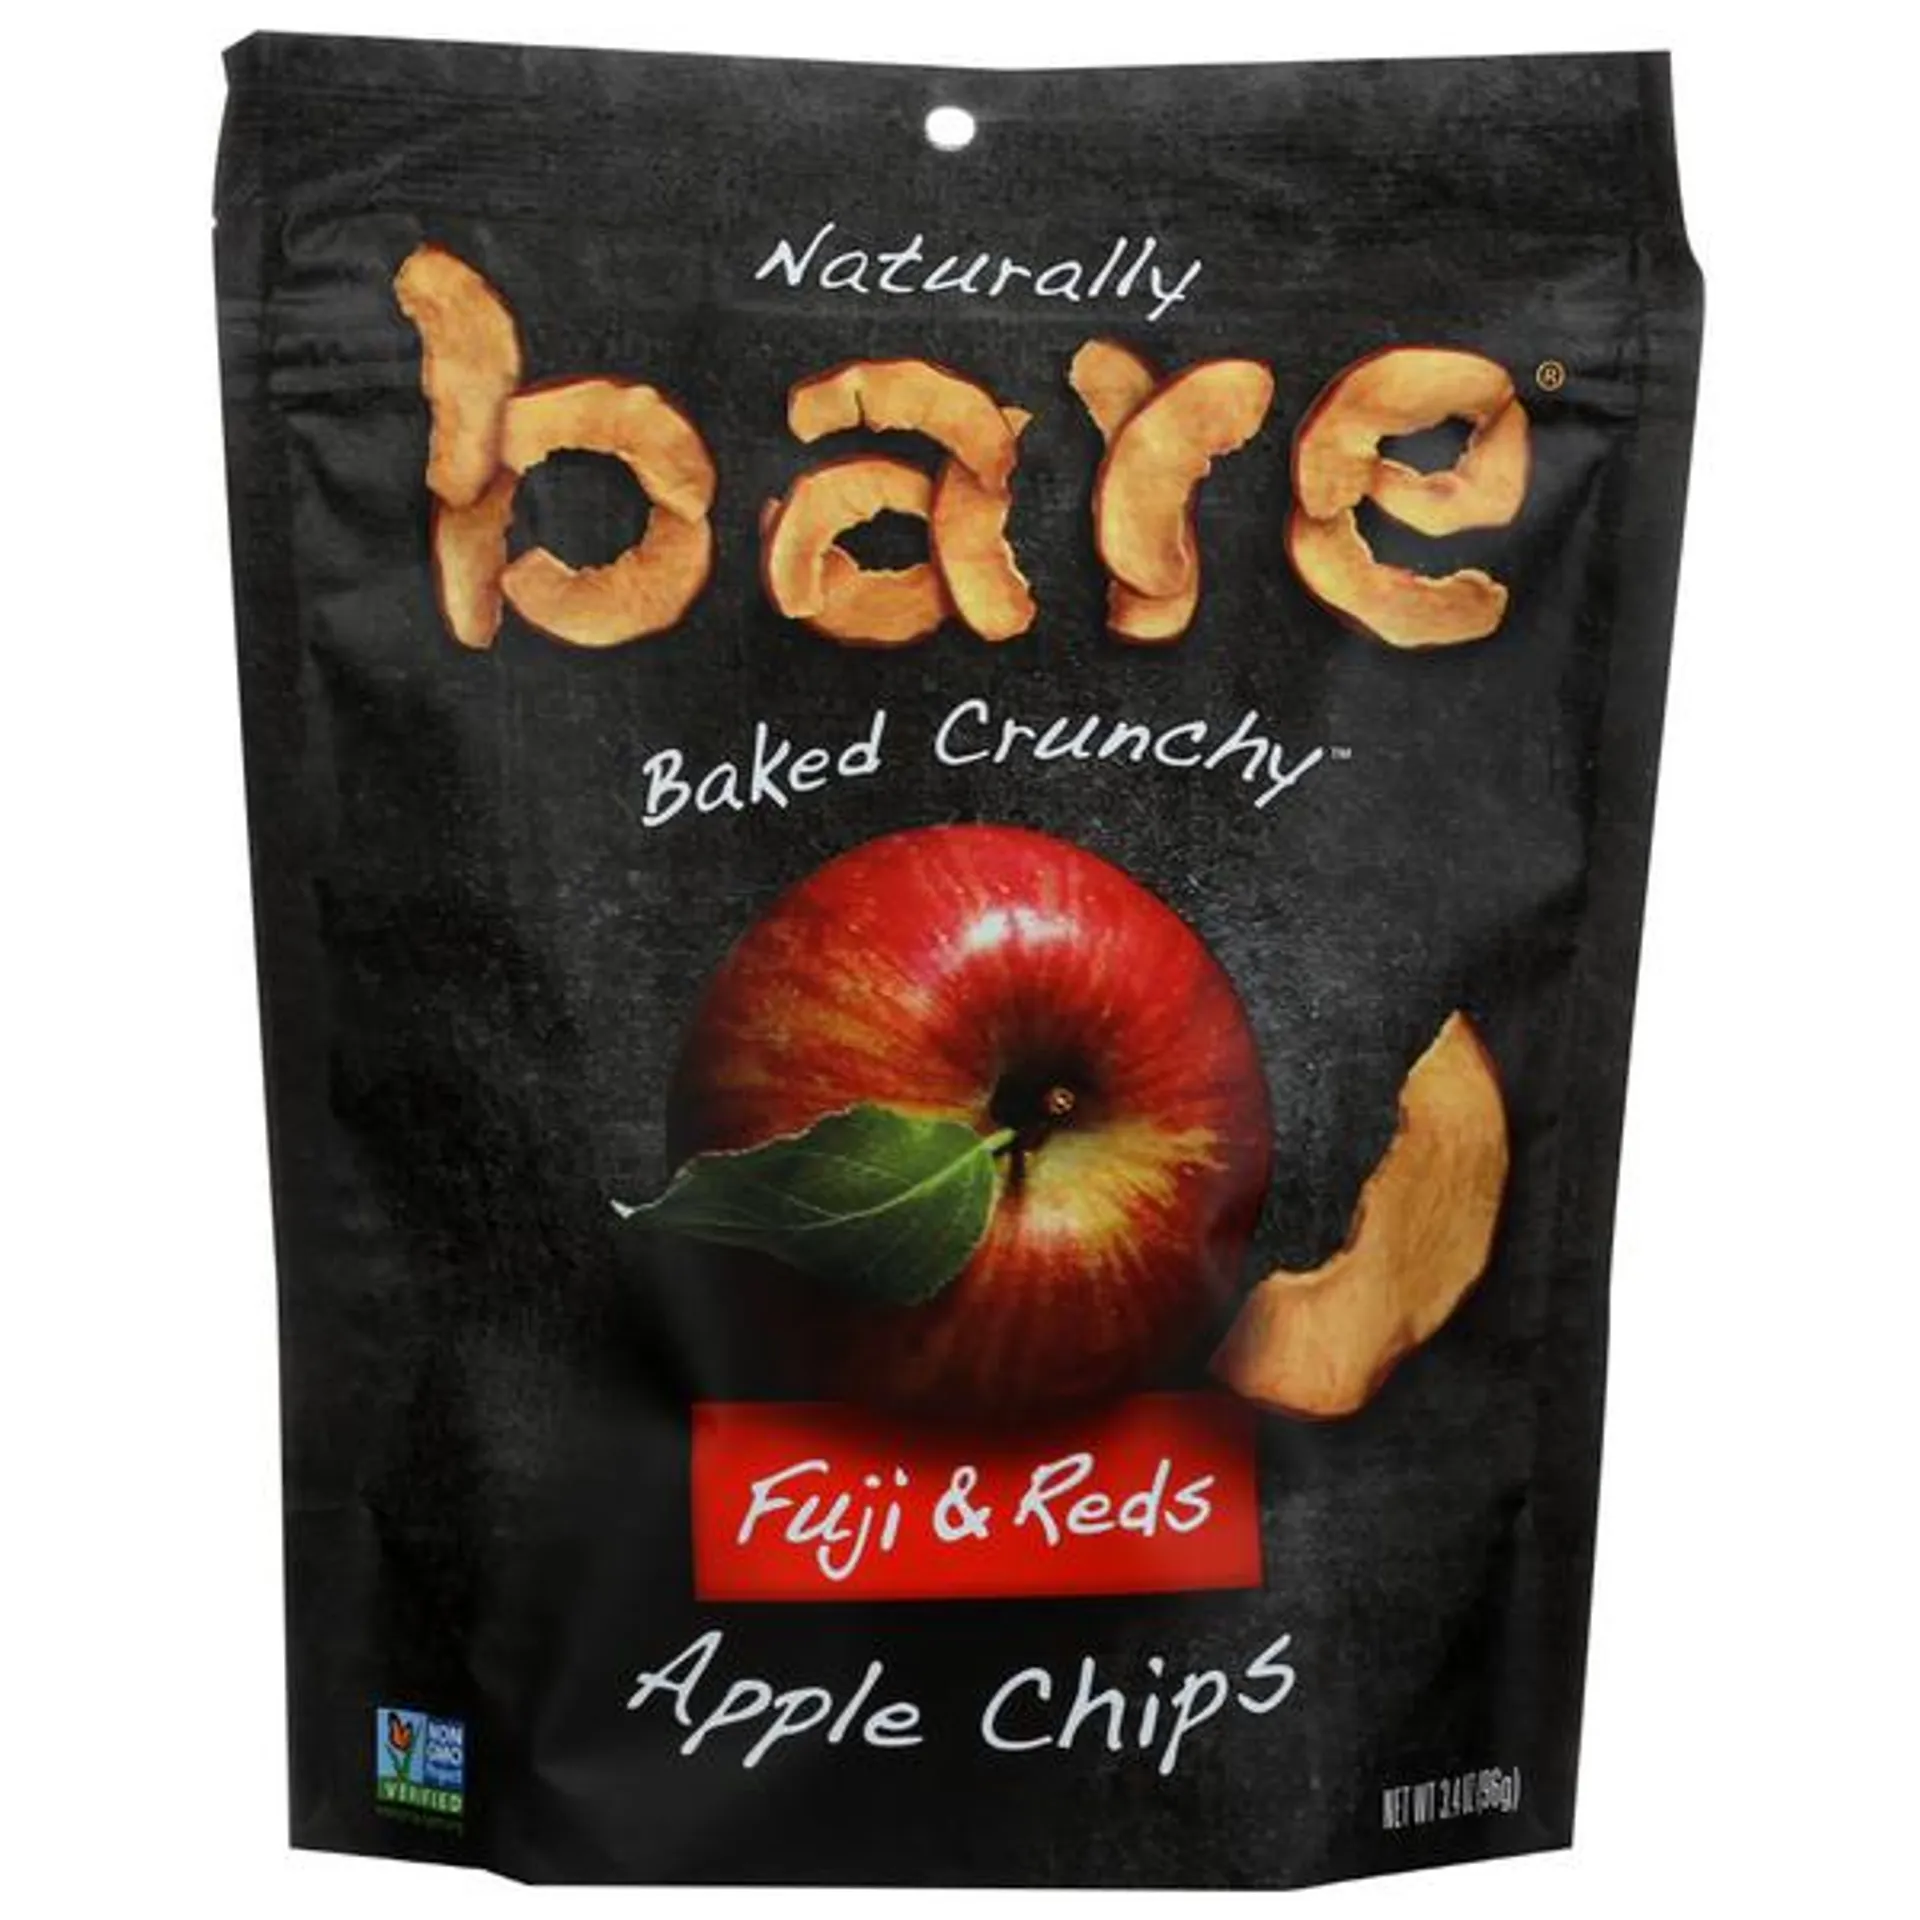 Bare Fruit Fuji & Red Apple Chips - 3.4 Ounce